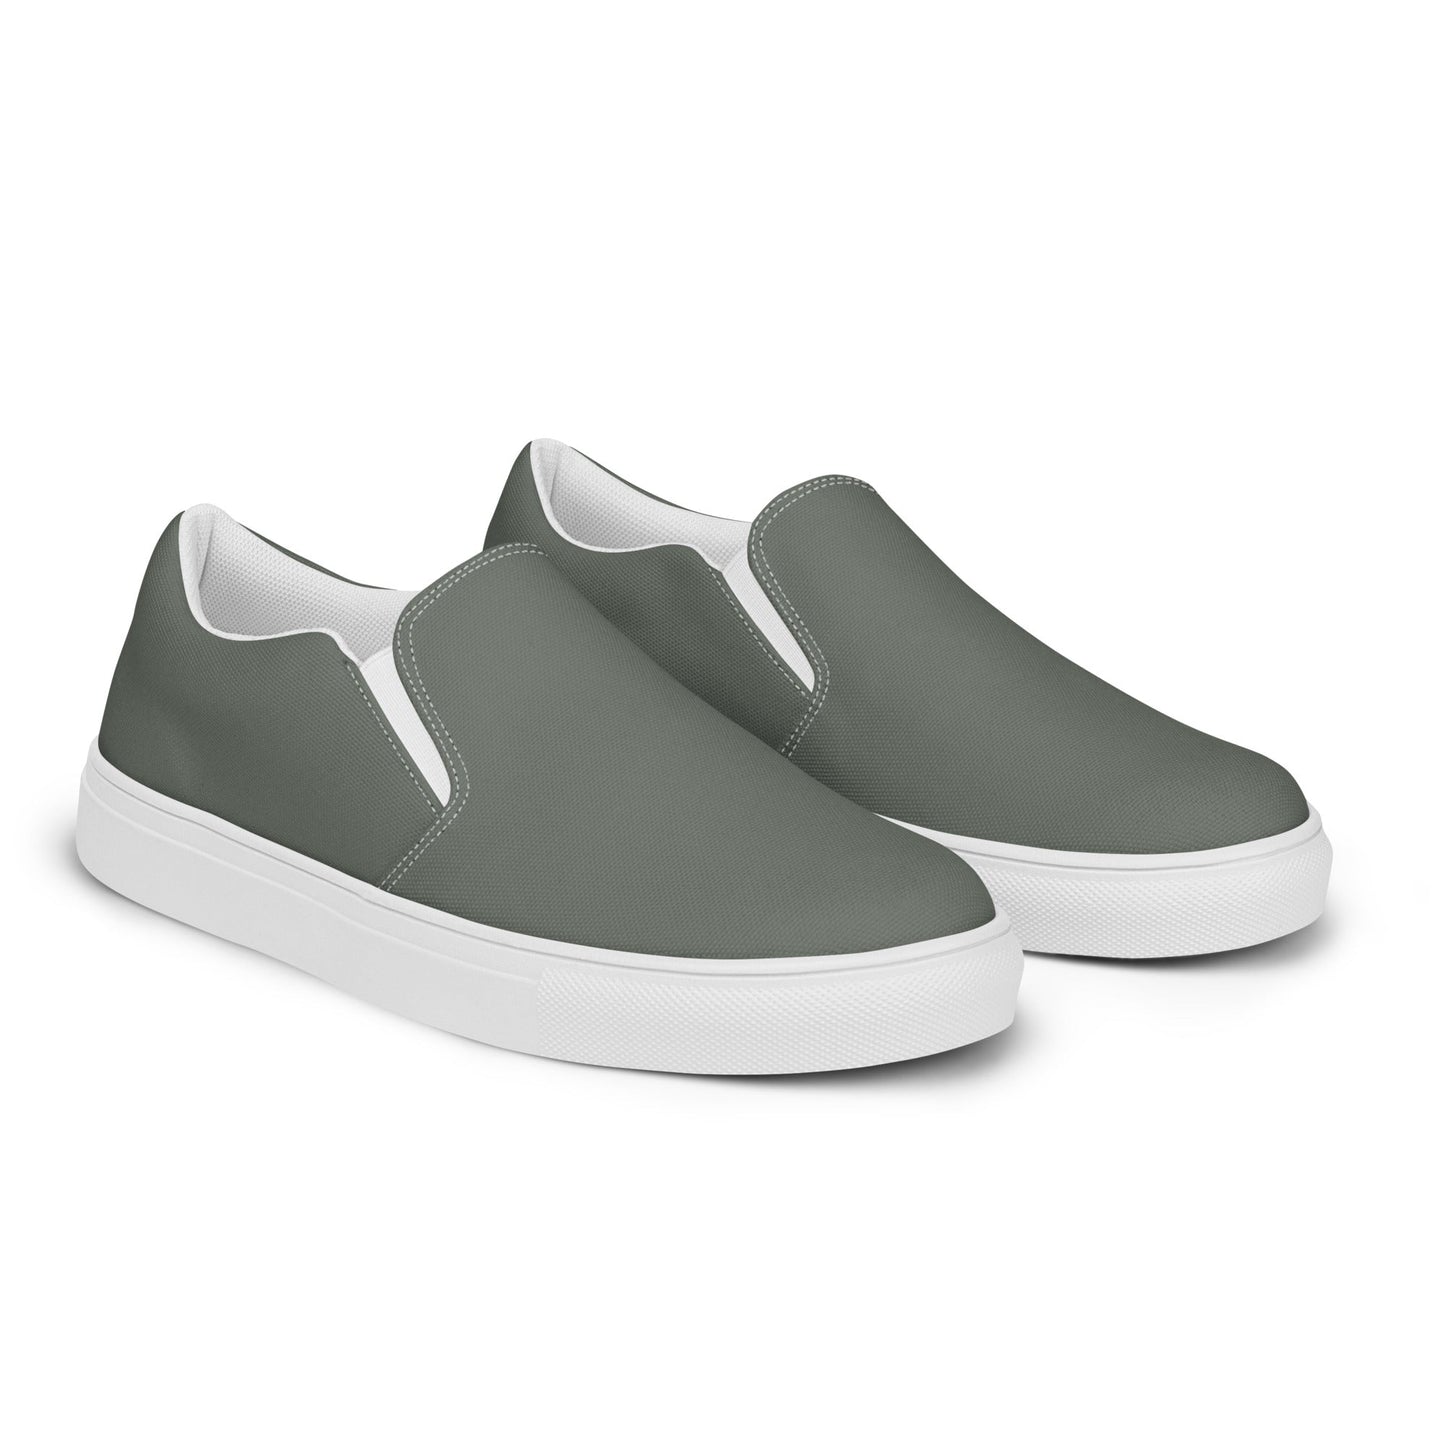 klasneakers Women’s slip-on canvas shoes - Olive Drab Gray